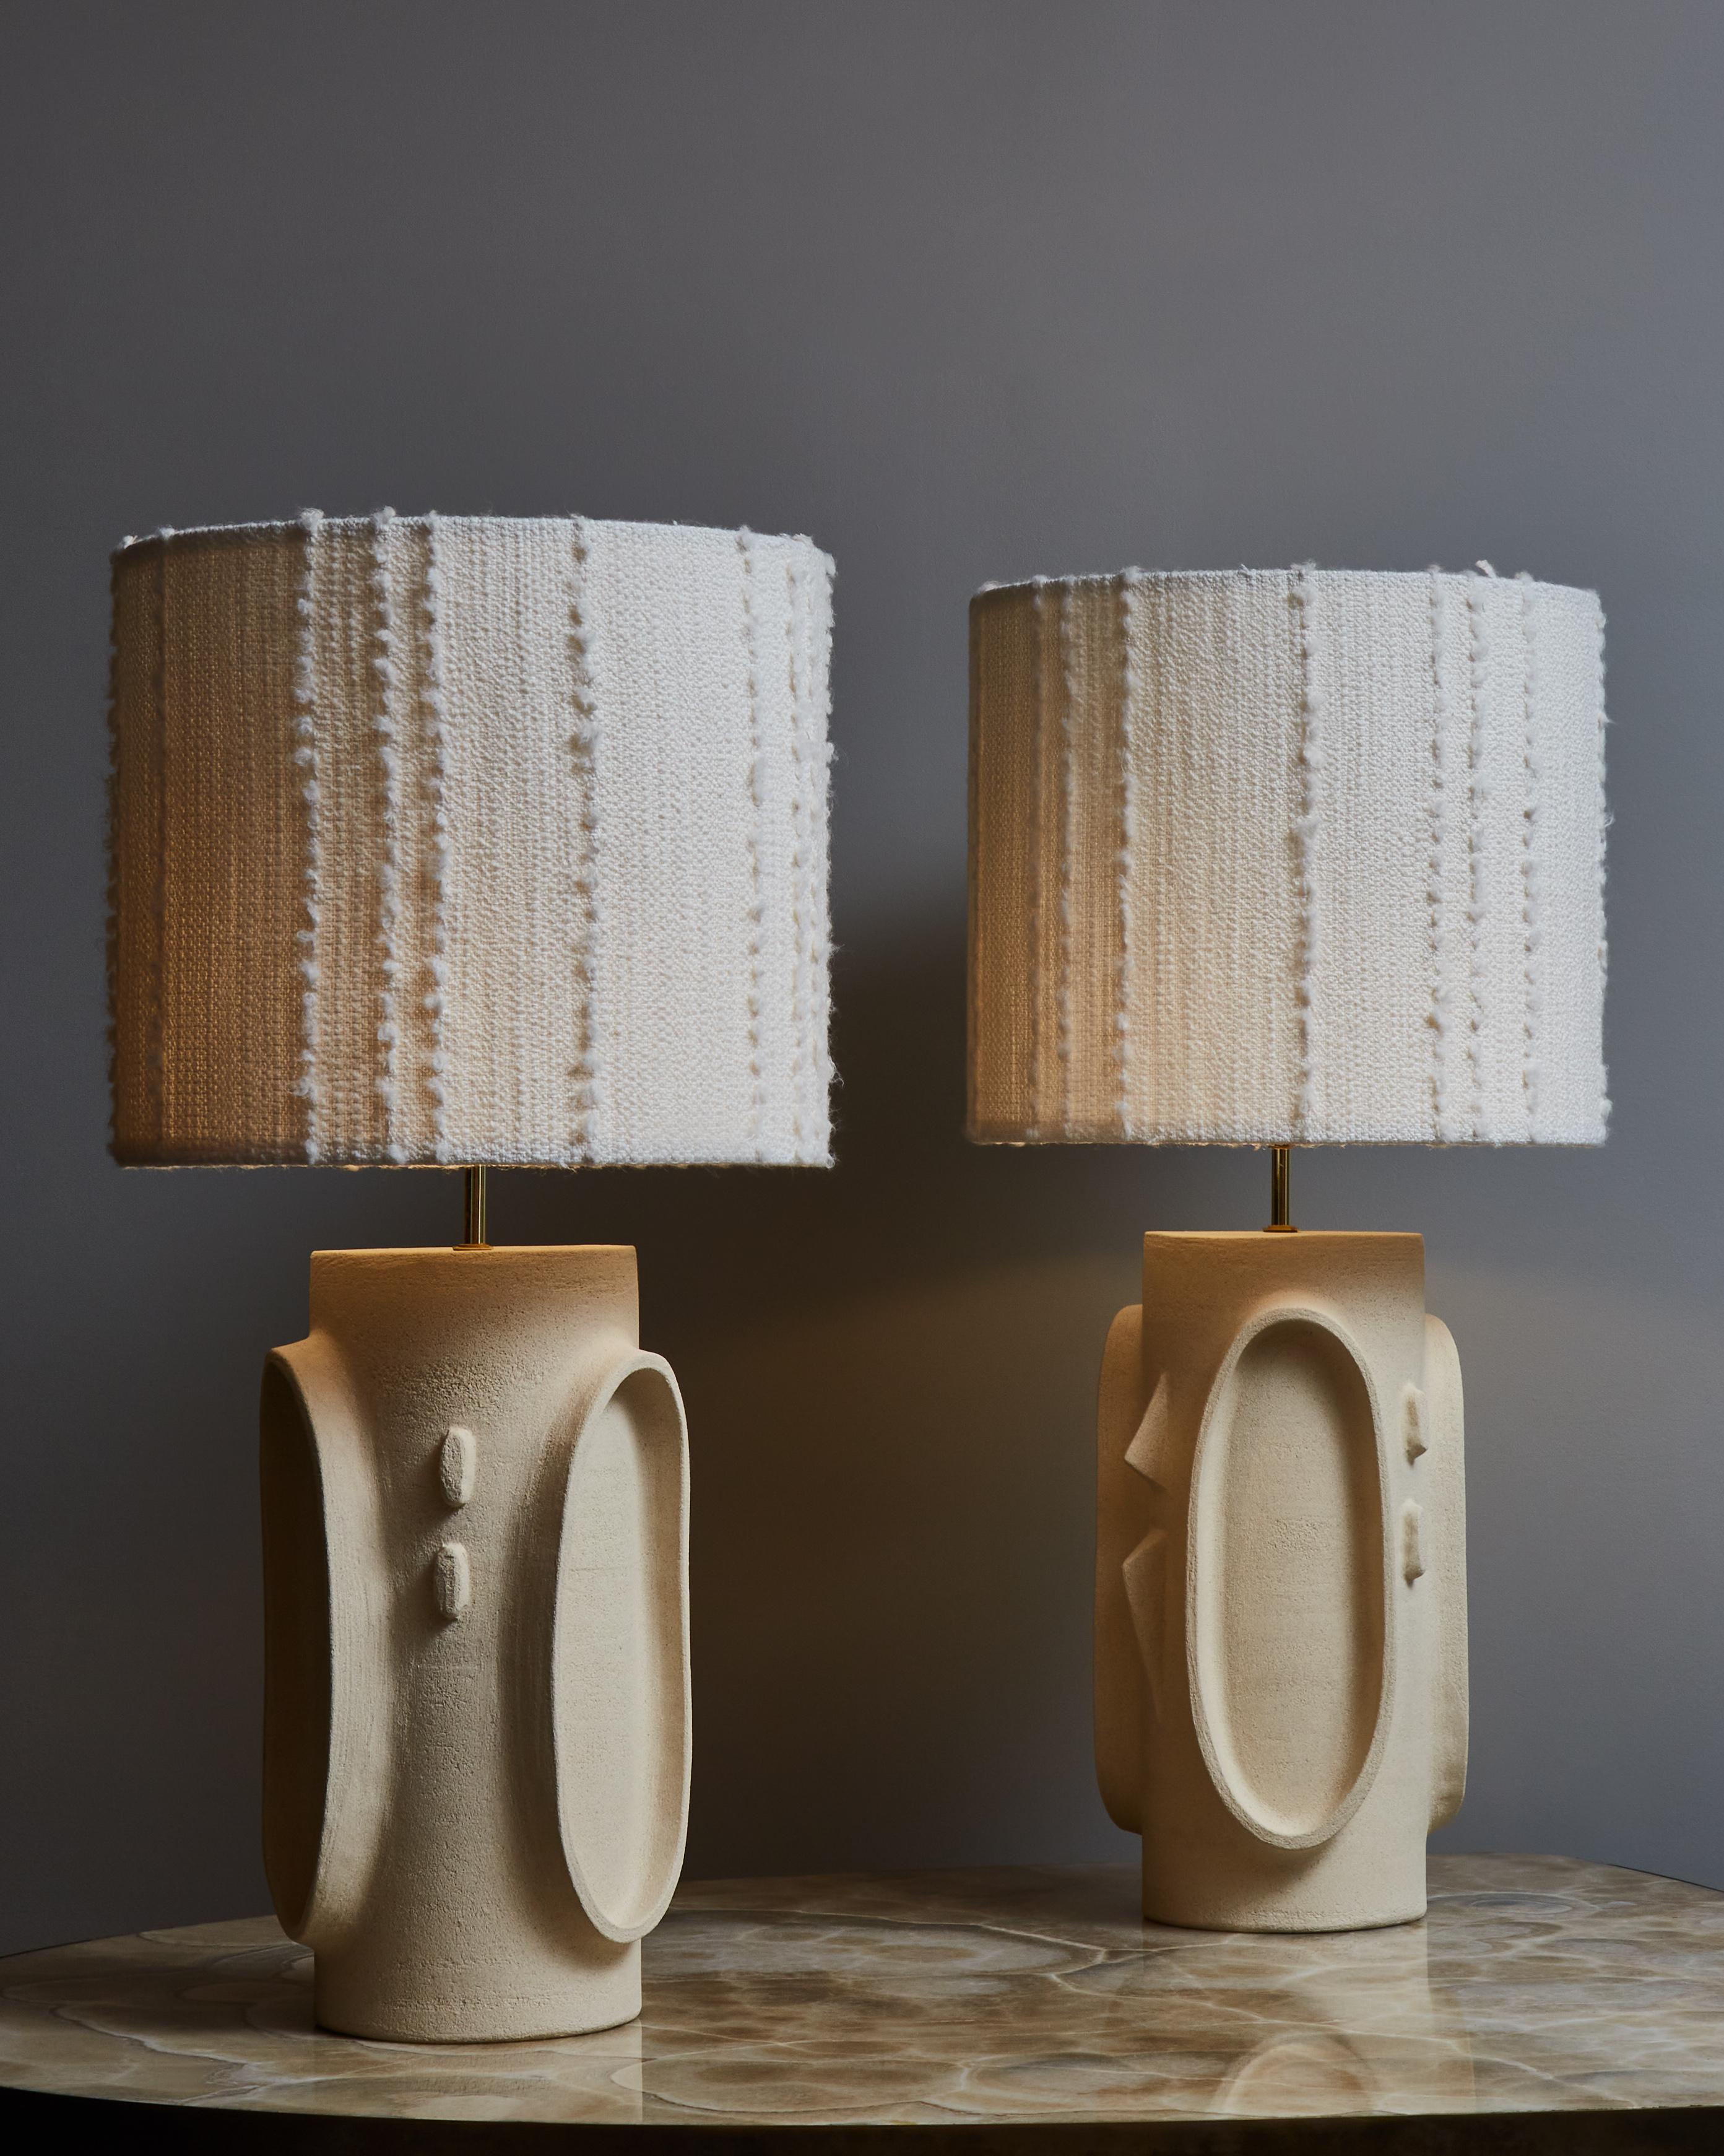 Pair of tall and elegant table lamps made in ceramic by the French artist Olivia Cognet, topped with Dedar Milano fabric lamp shades.

Since moving to Los Angeles in 2016, French artist and desi- gner Olivia Cognet has focused on ceramics as the